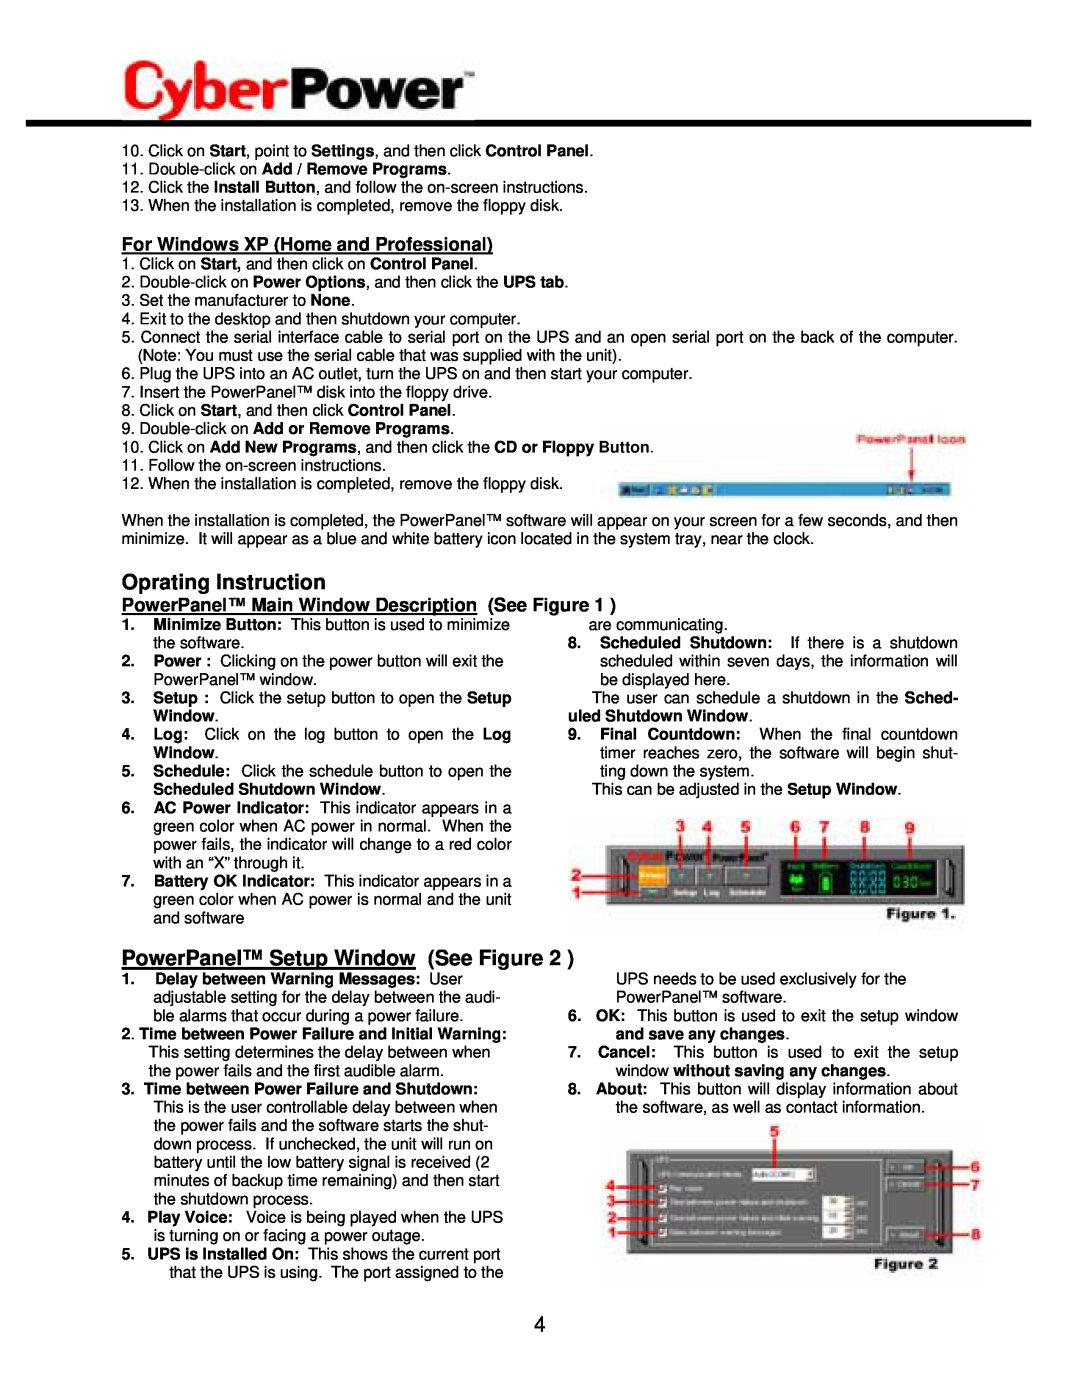 CyberPower Systems CPS725SL user manual Oprating Instruction, PowerPanel Setup Window See Figure 